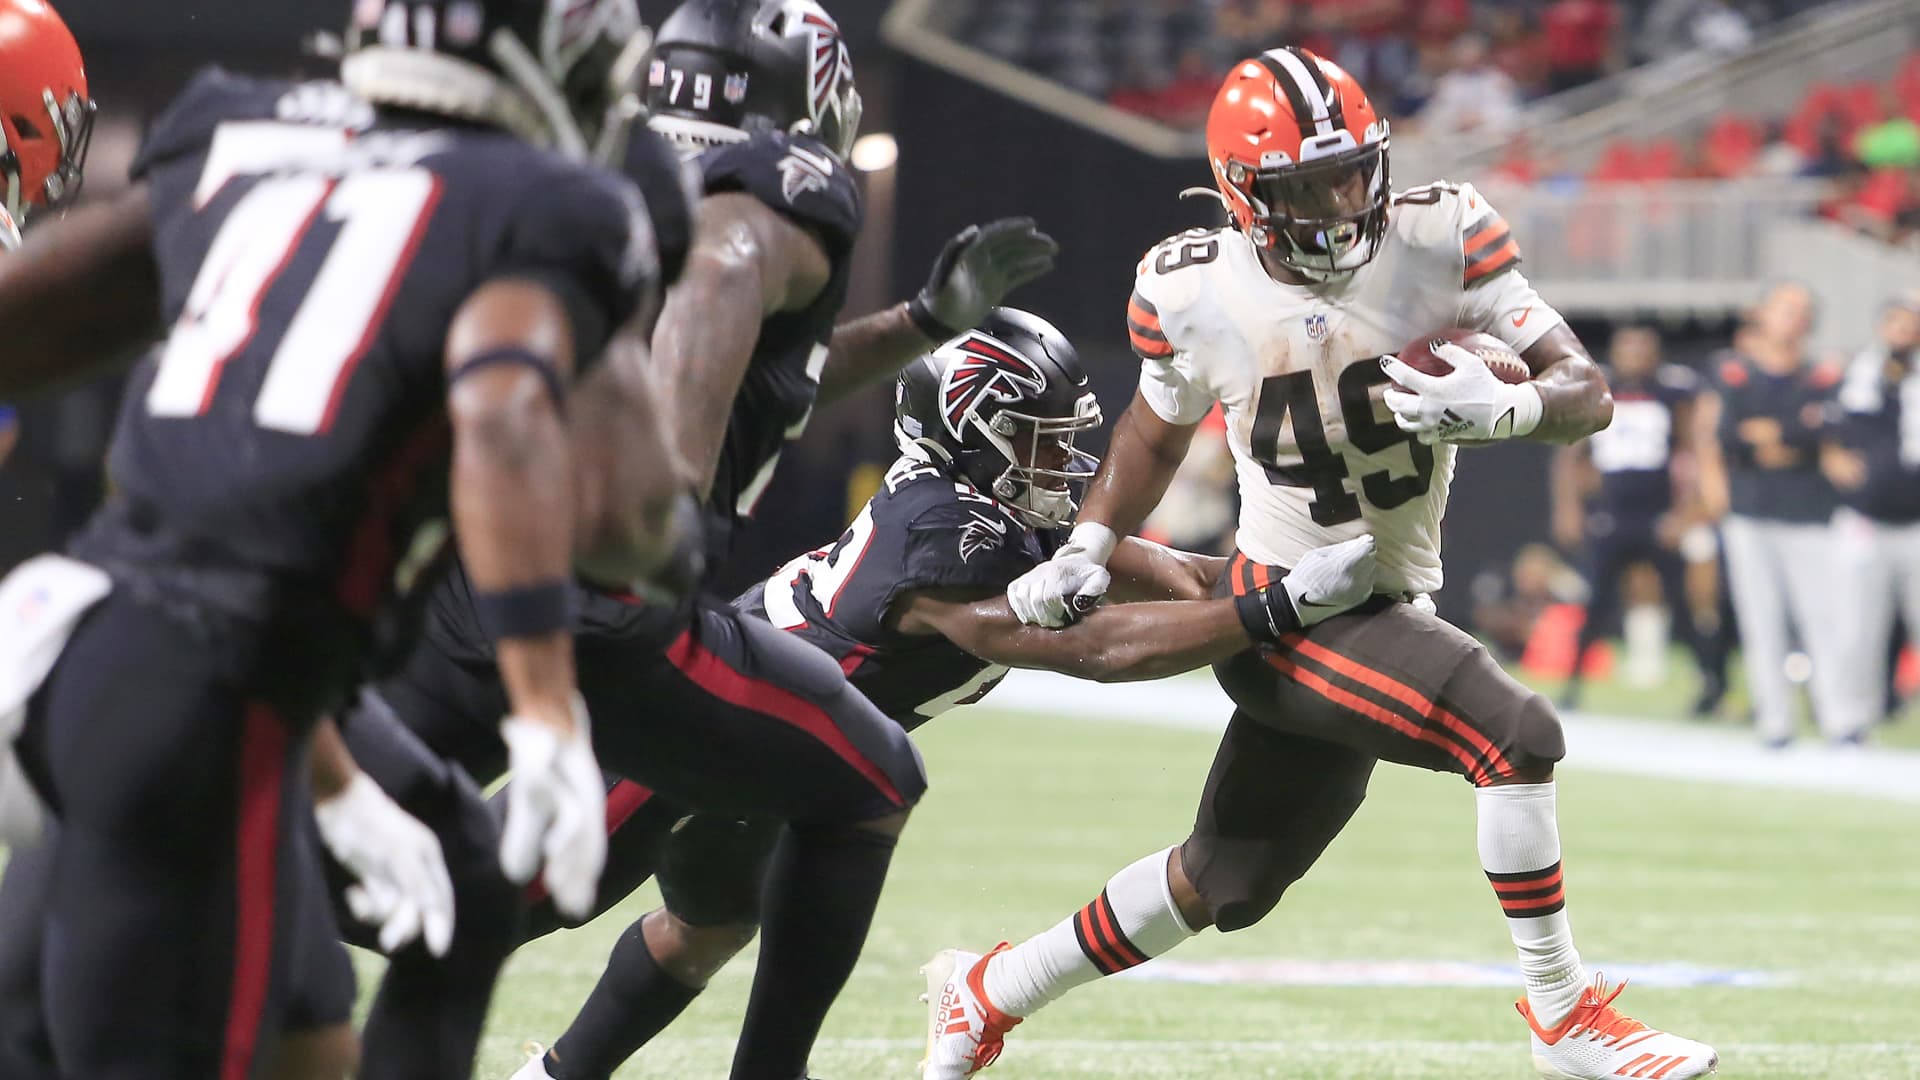 Running back John Kelly #49 of the Cleveland Browns escapes the Falcons defense during the final preseason NFL game between the Cleveland Browns and the Atlanta Falcons on August 29, 2021 at the Mercedes-Benz Stadium in Atlanta, Georgia.